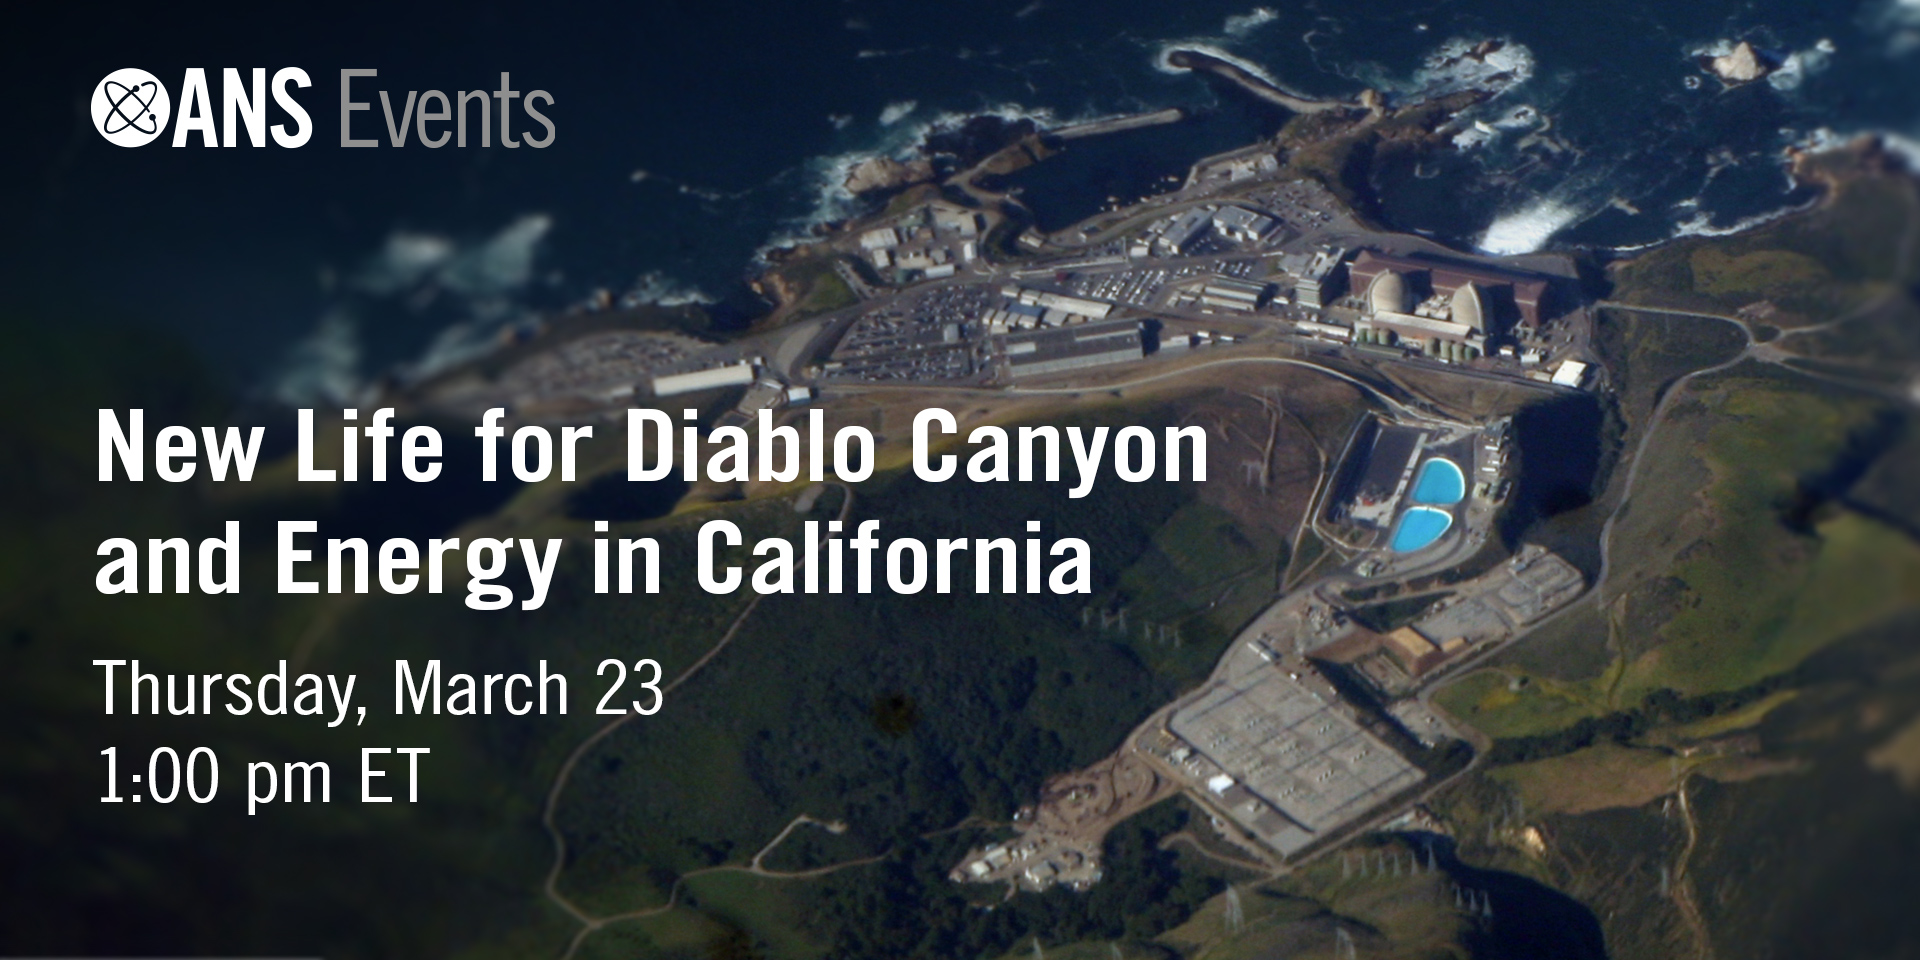 Find out how we can keep Diablo Canyon running!